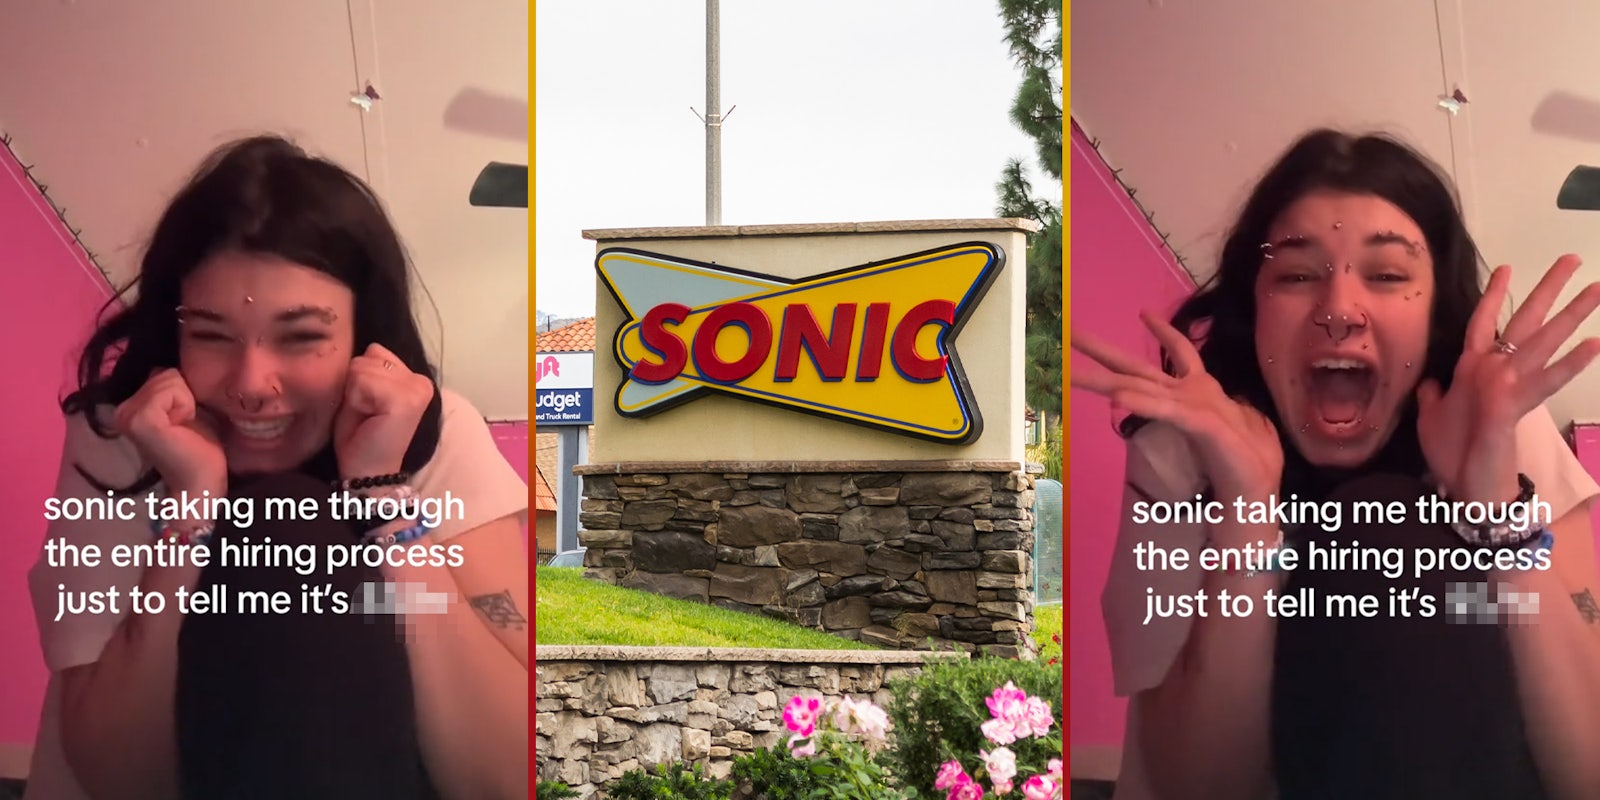 TikToker shares What Sonic pays employees